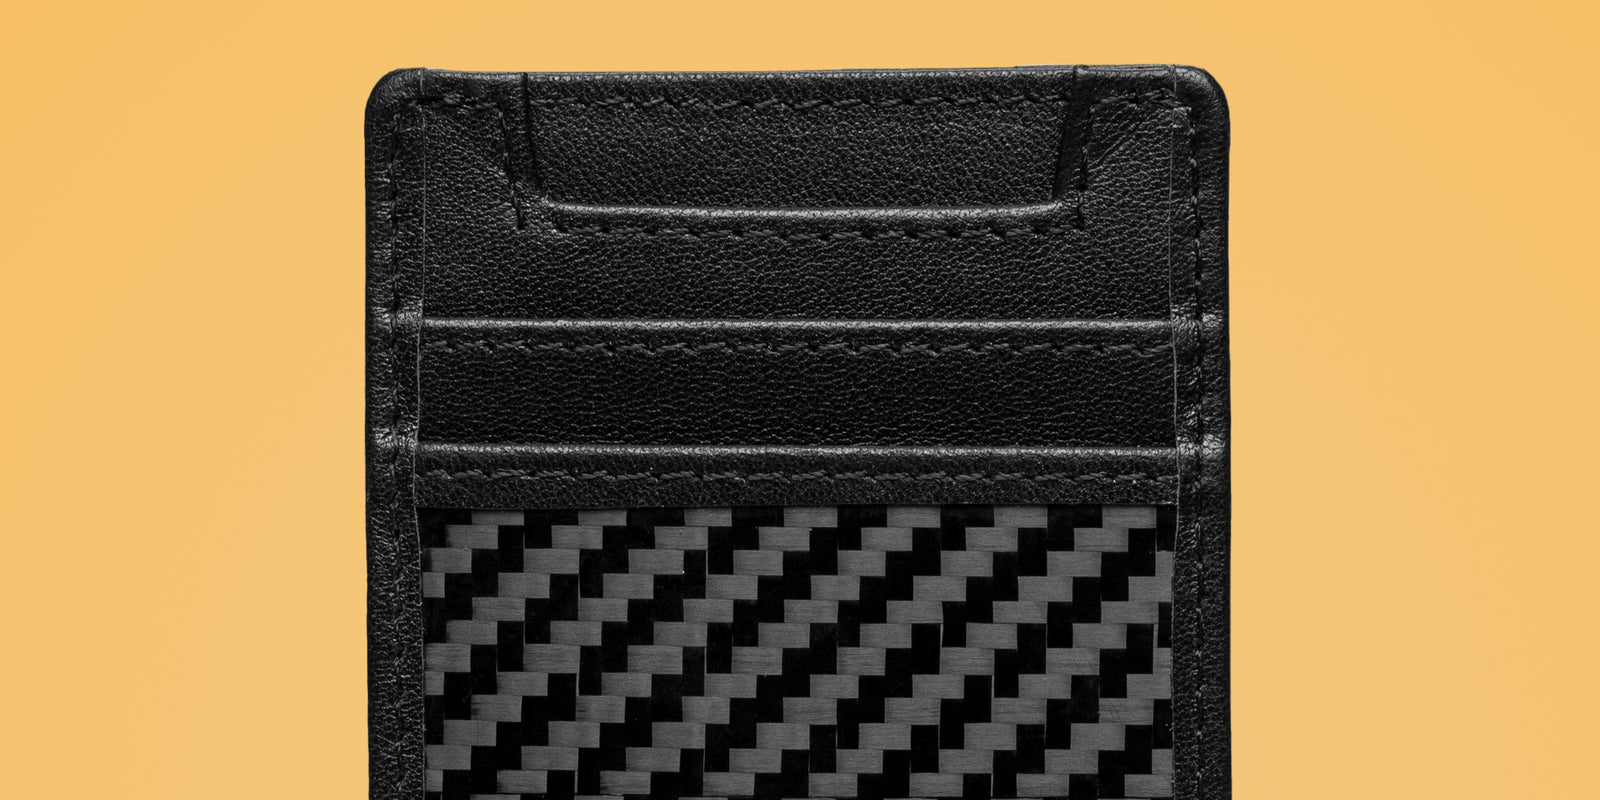 Close-up shot of the wallet showcasing the carbon fiber weave and the rich leather texture.